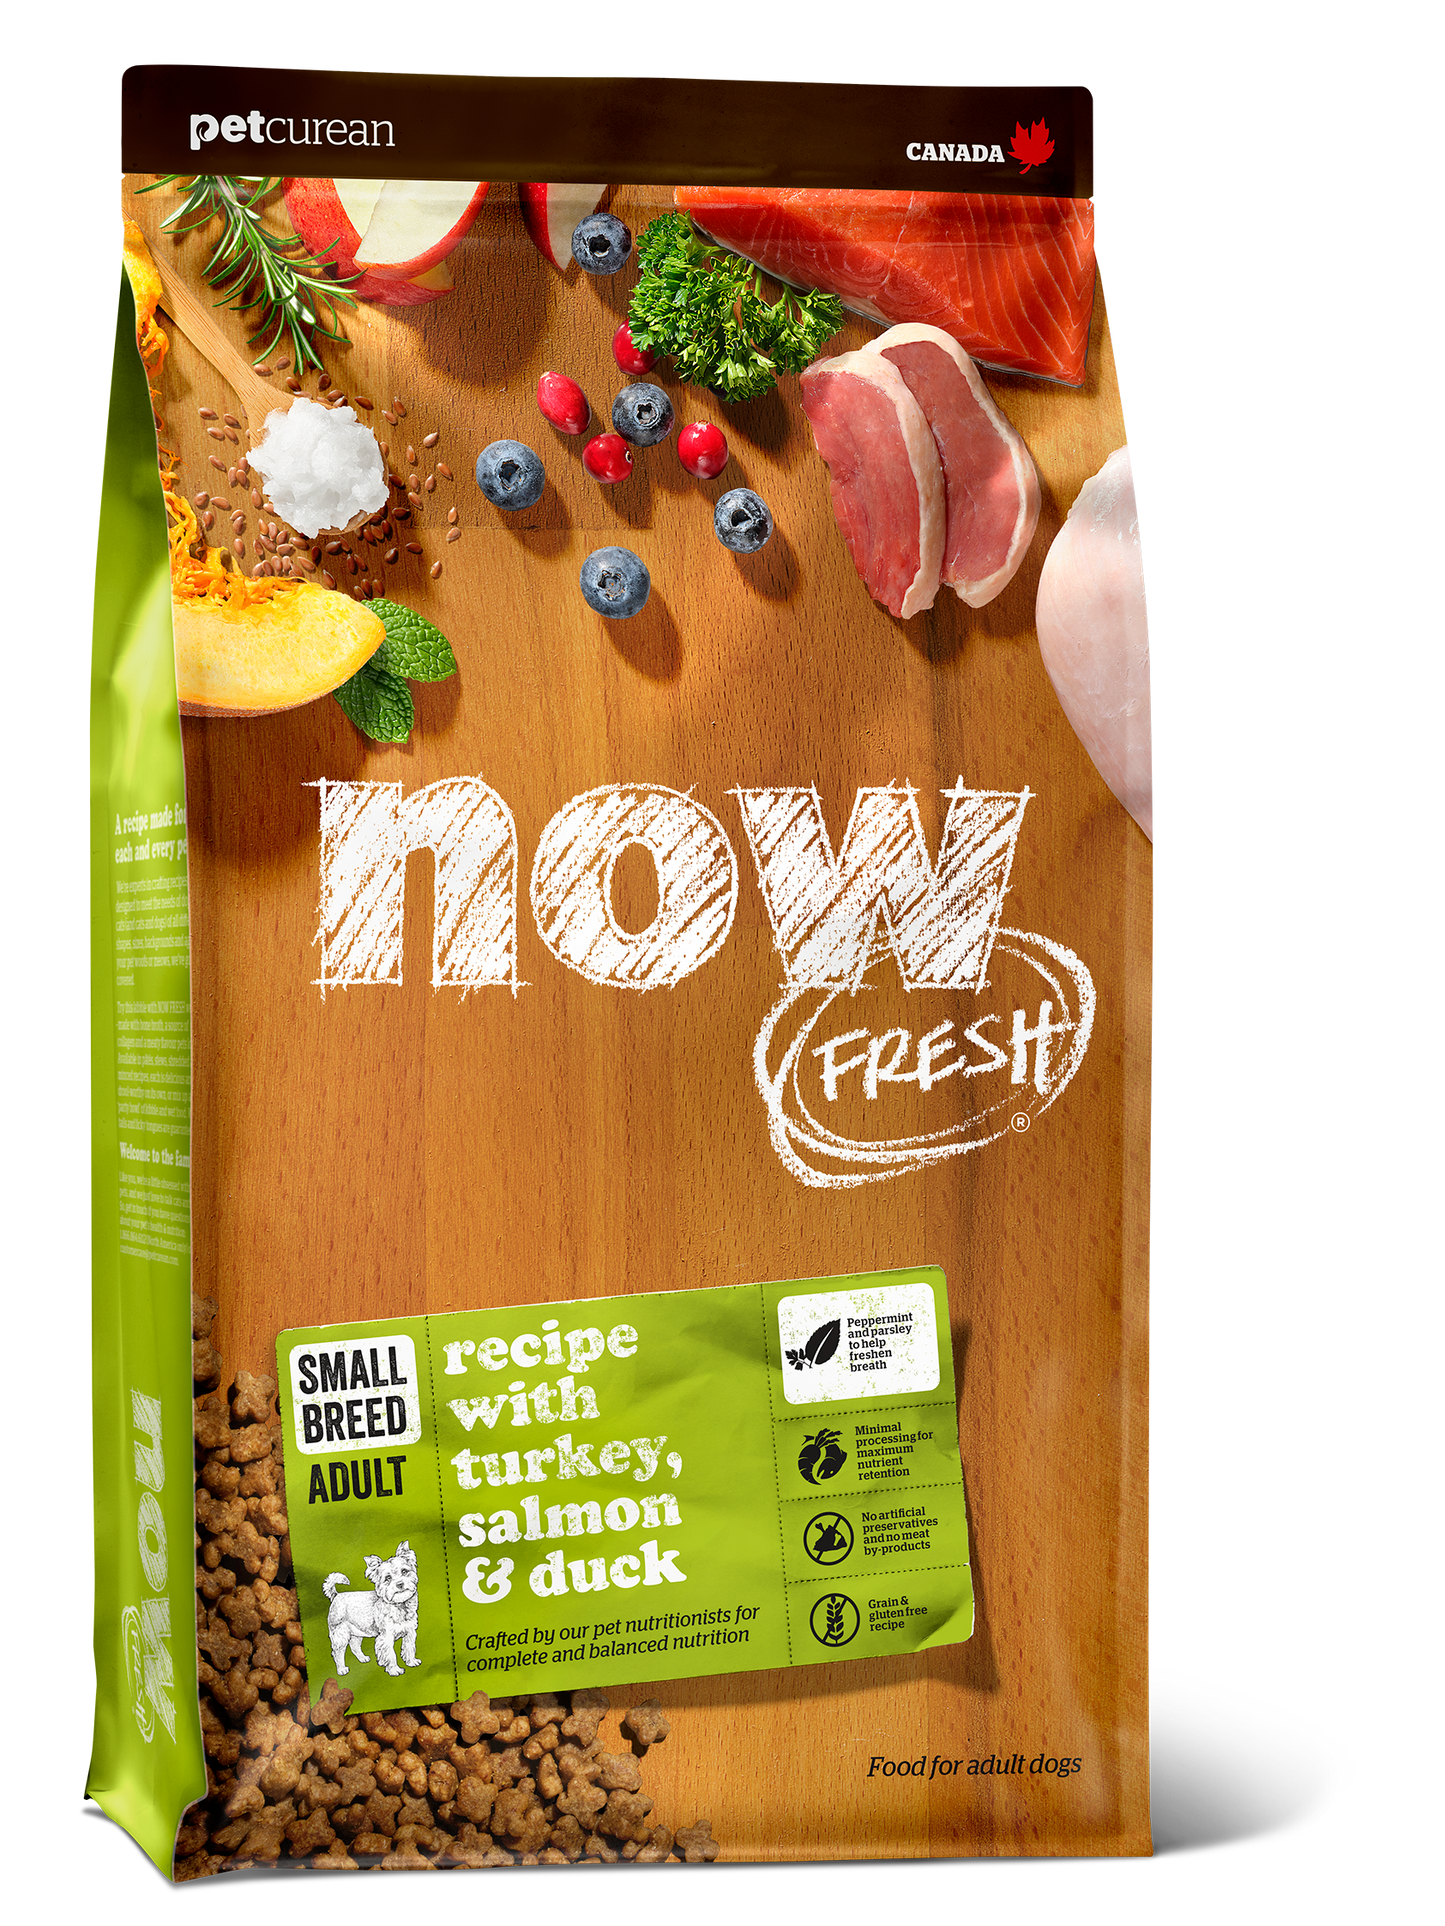 SALE - NOW FRESH Grain Free Small Breed Adult Recipe